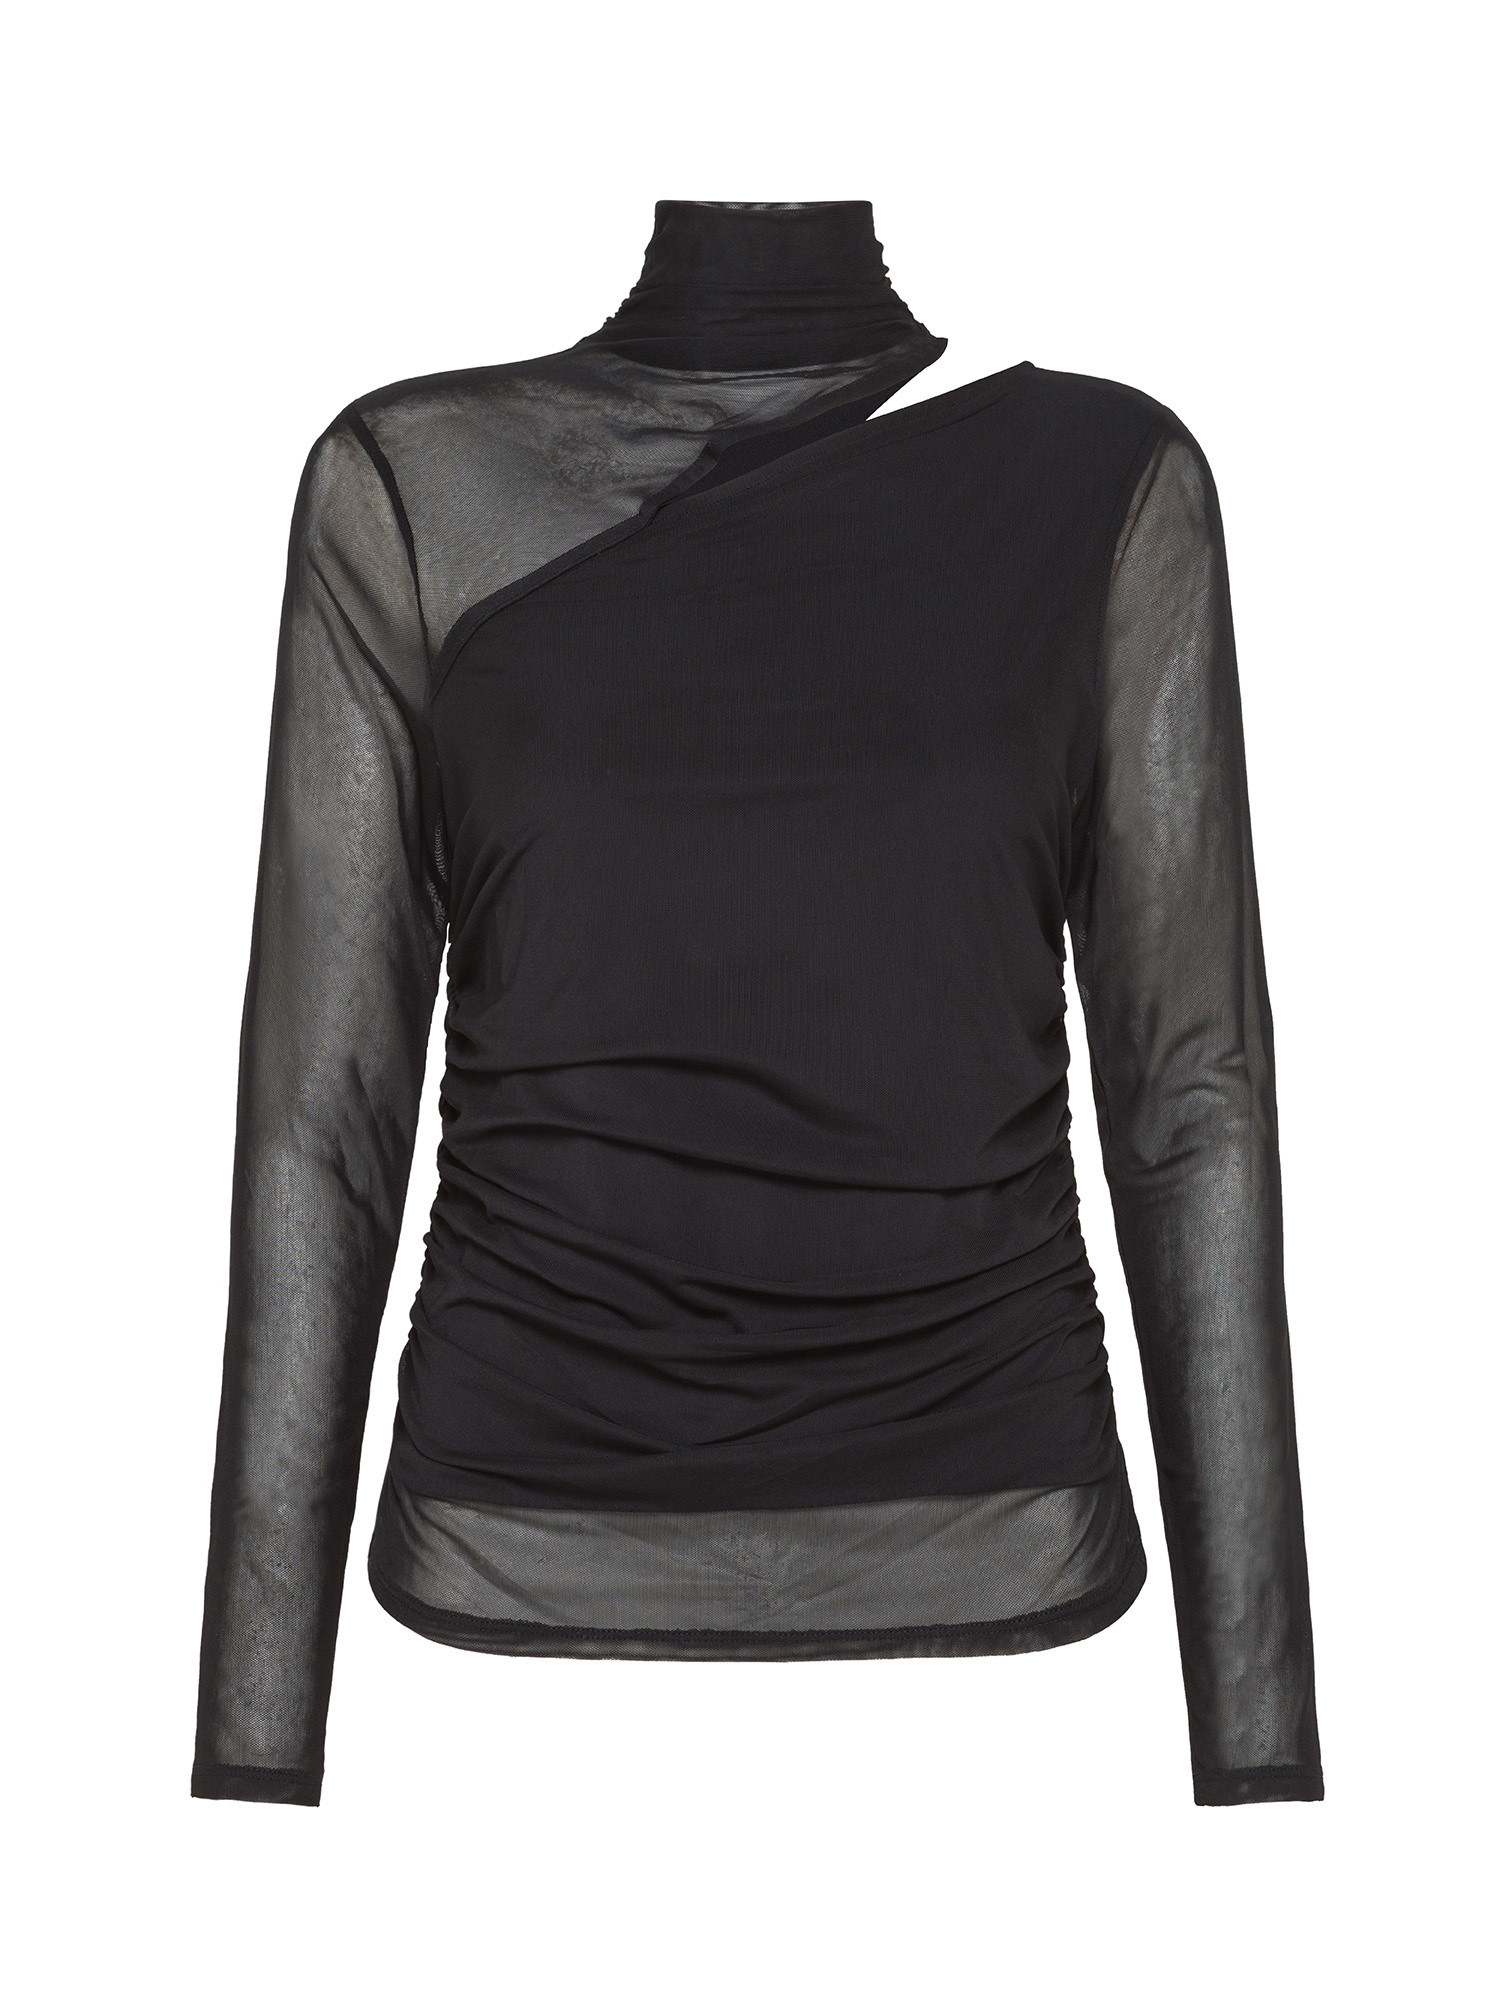 DKNY - Maglia in mesh con dettaglio cut out, Nero, large image number 0